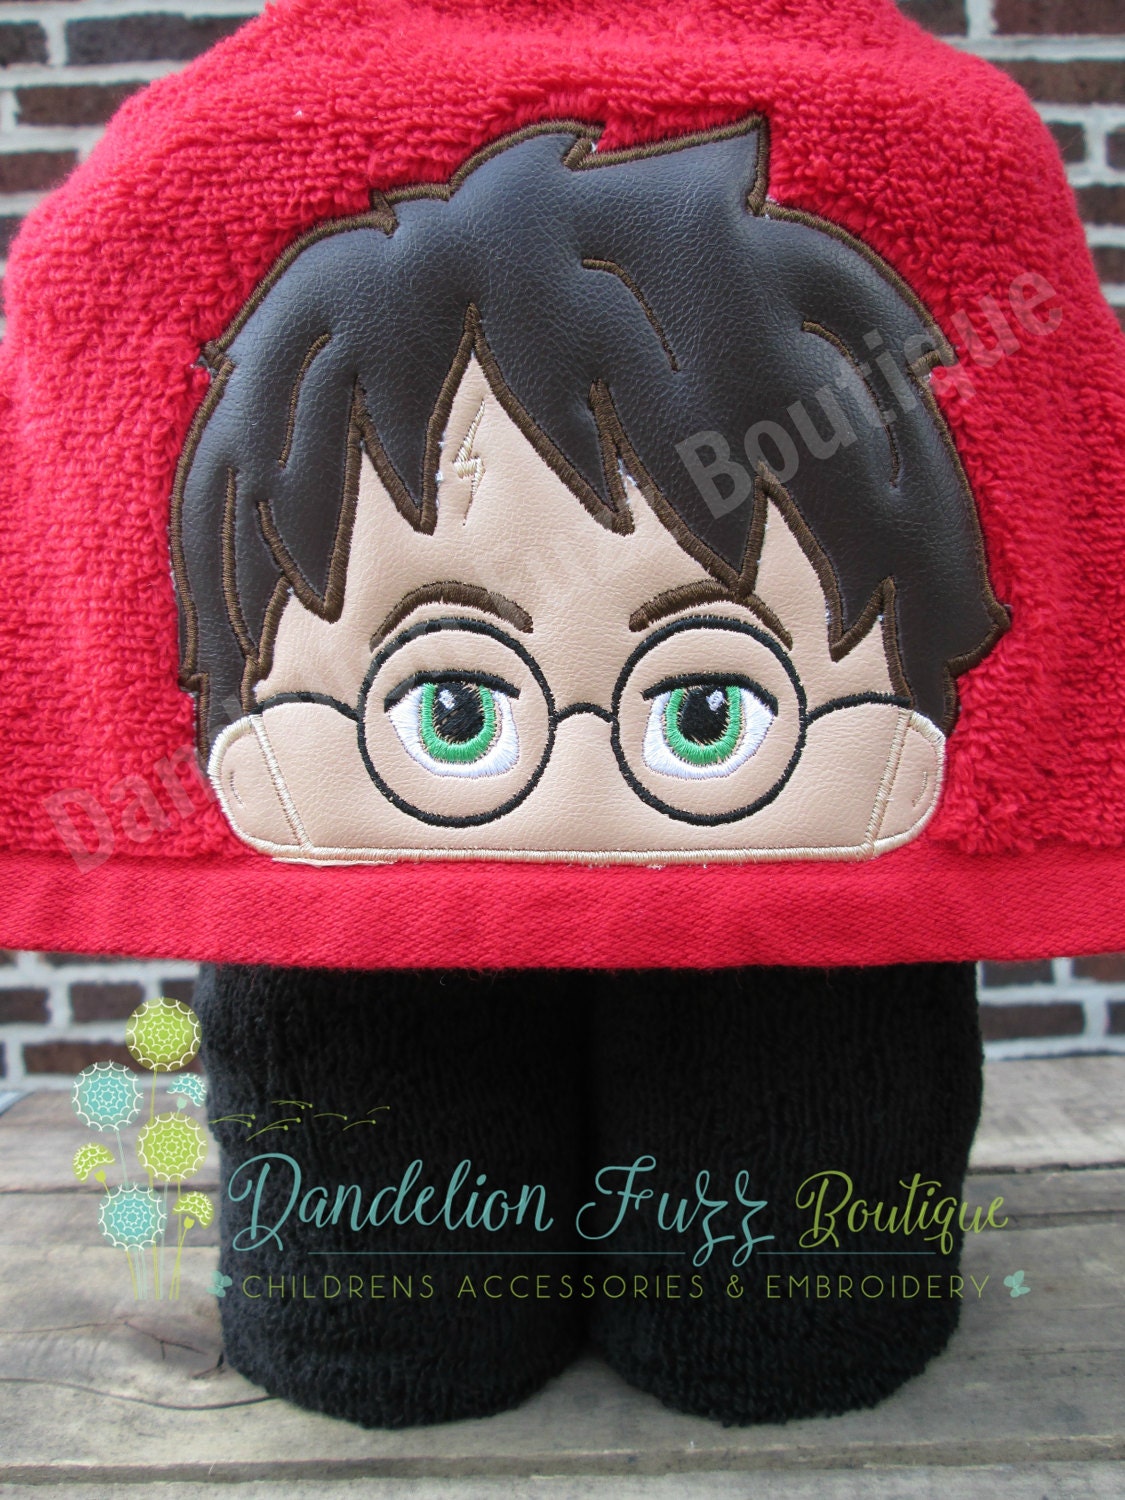 Boy Wizard Hooded Towel, Beach Towel, Pool Towel, Harry Potter Birthday, Harry Potter Party, Harry Party Gift, Present